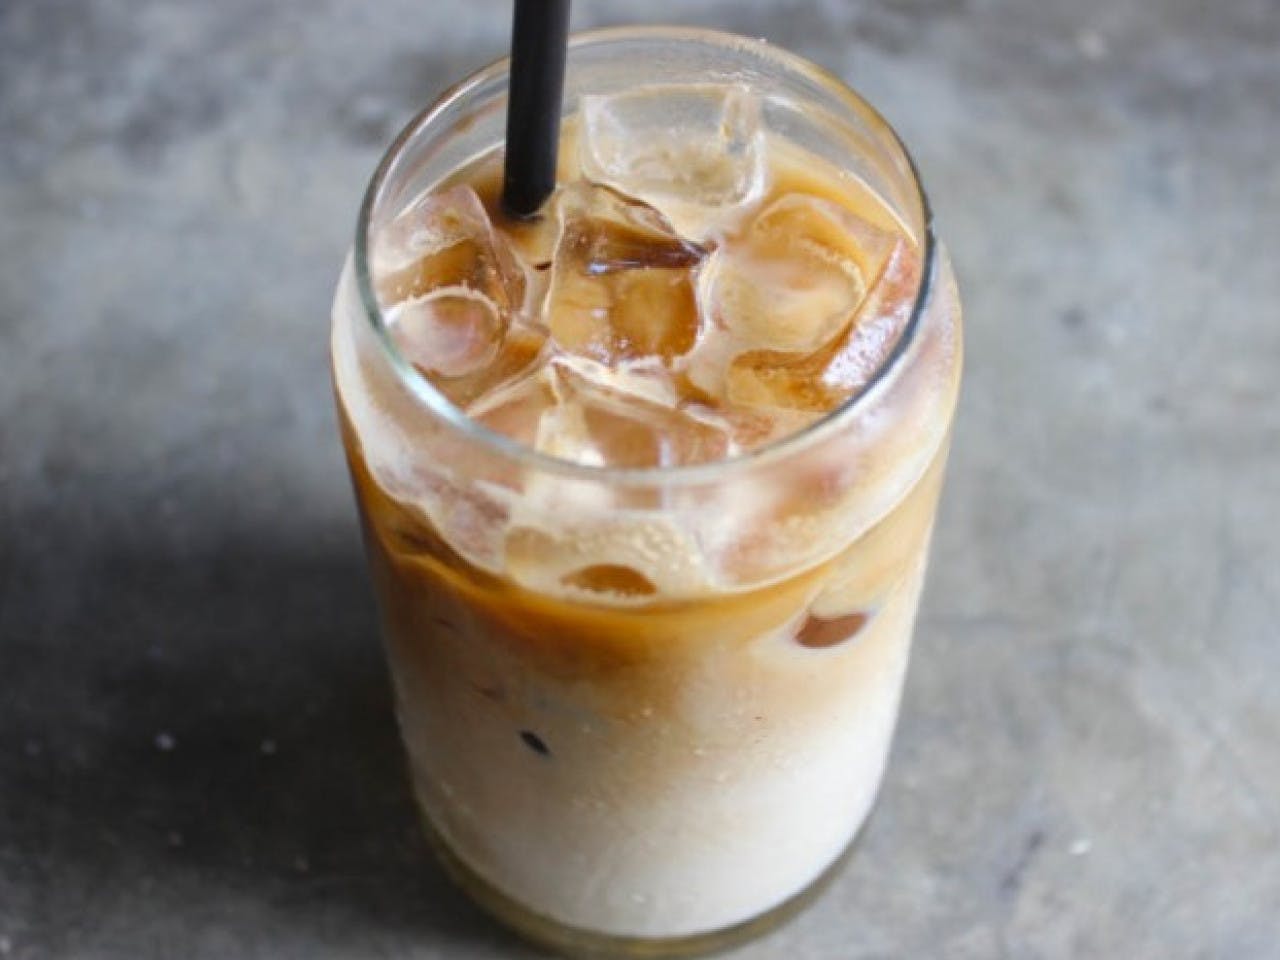 Iced coffee with almond milk